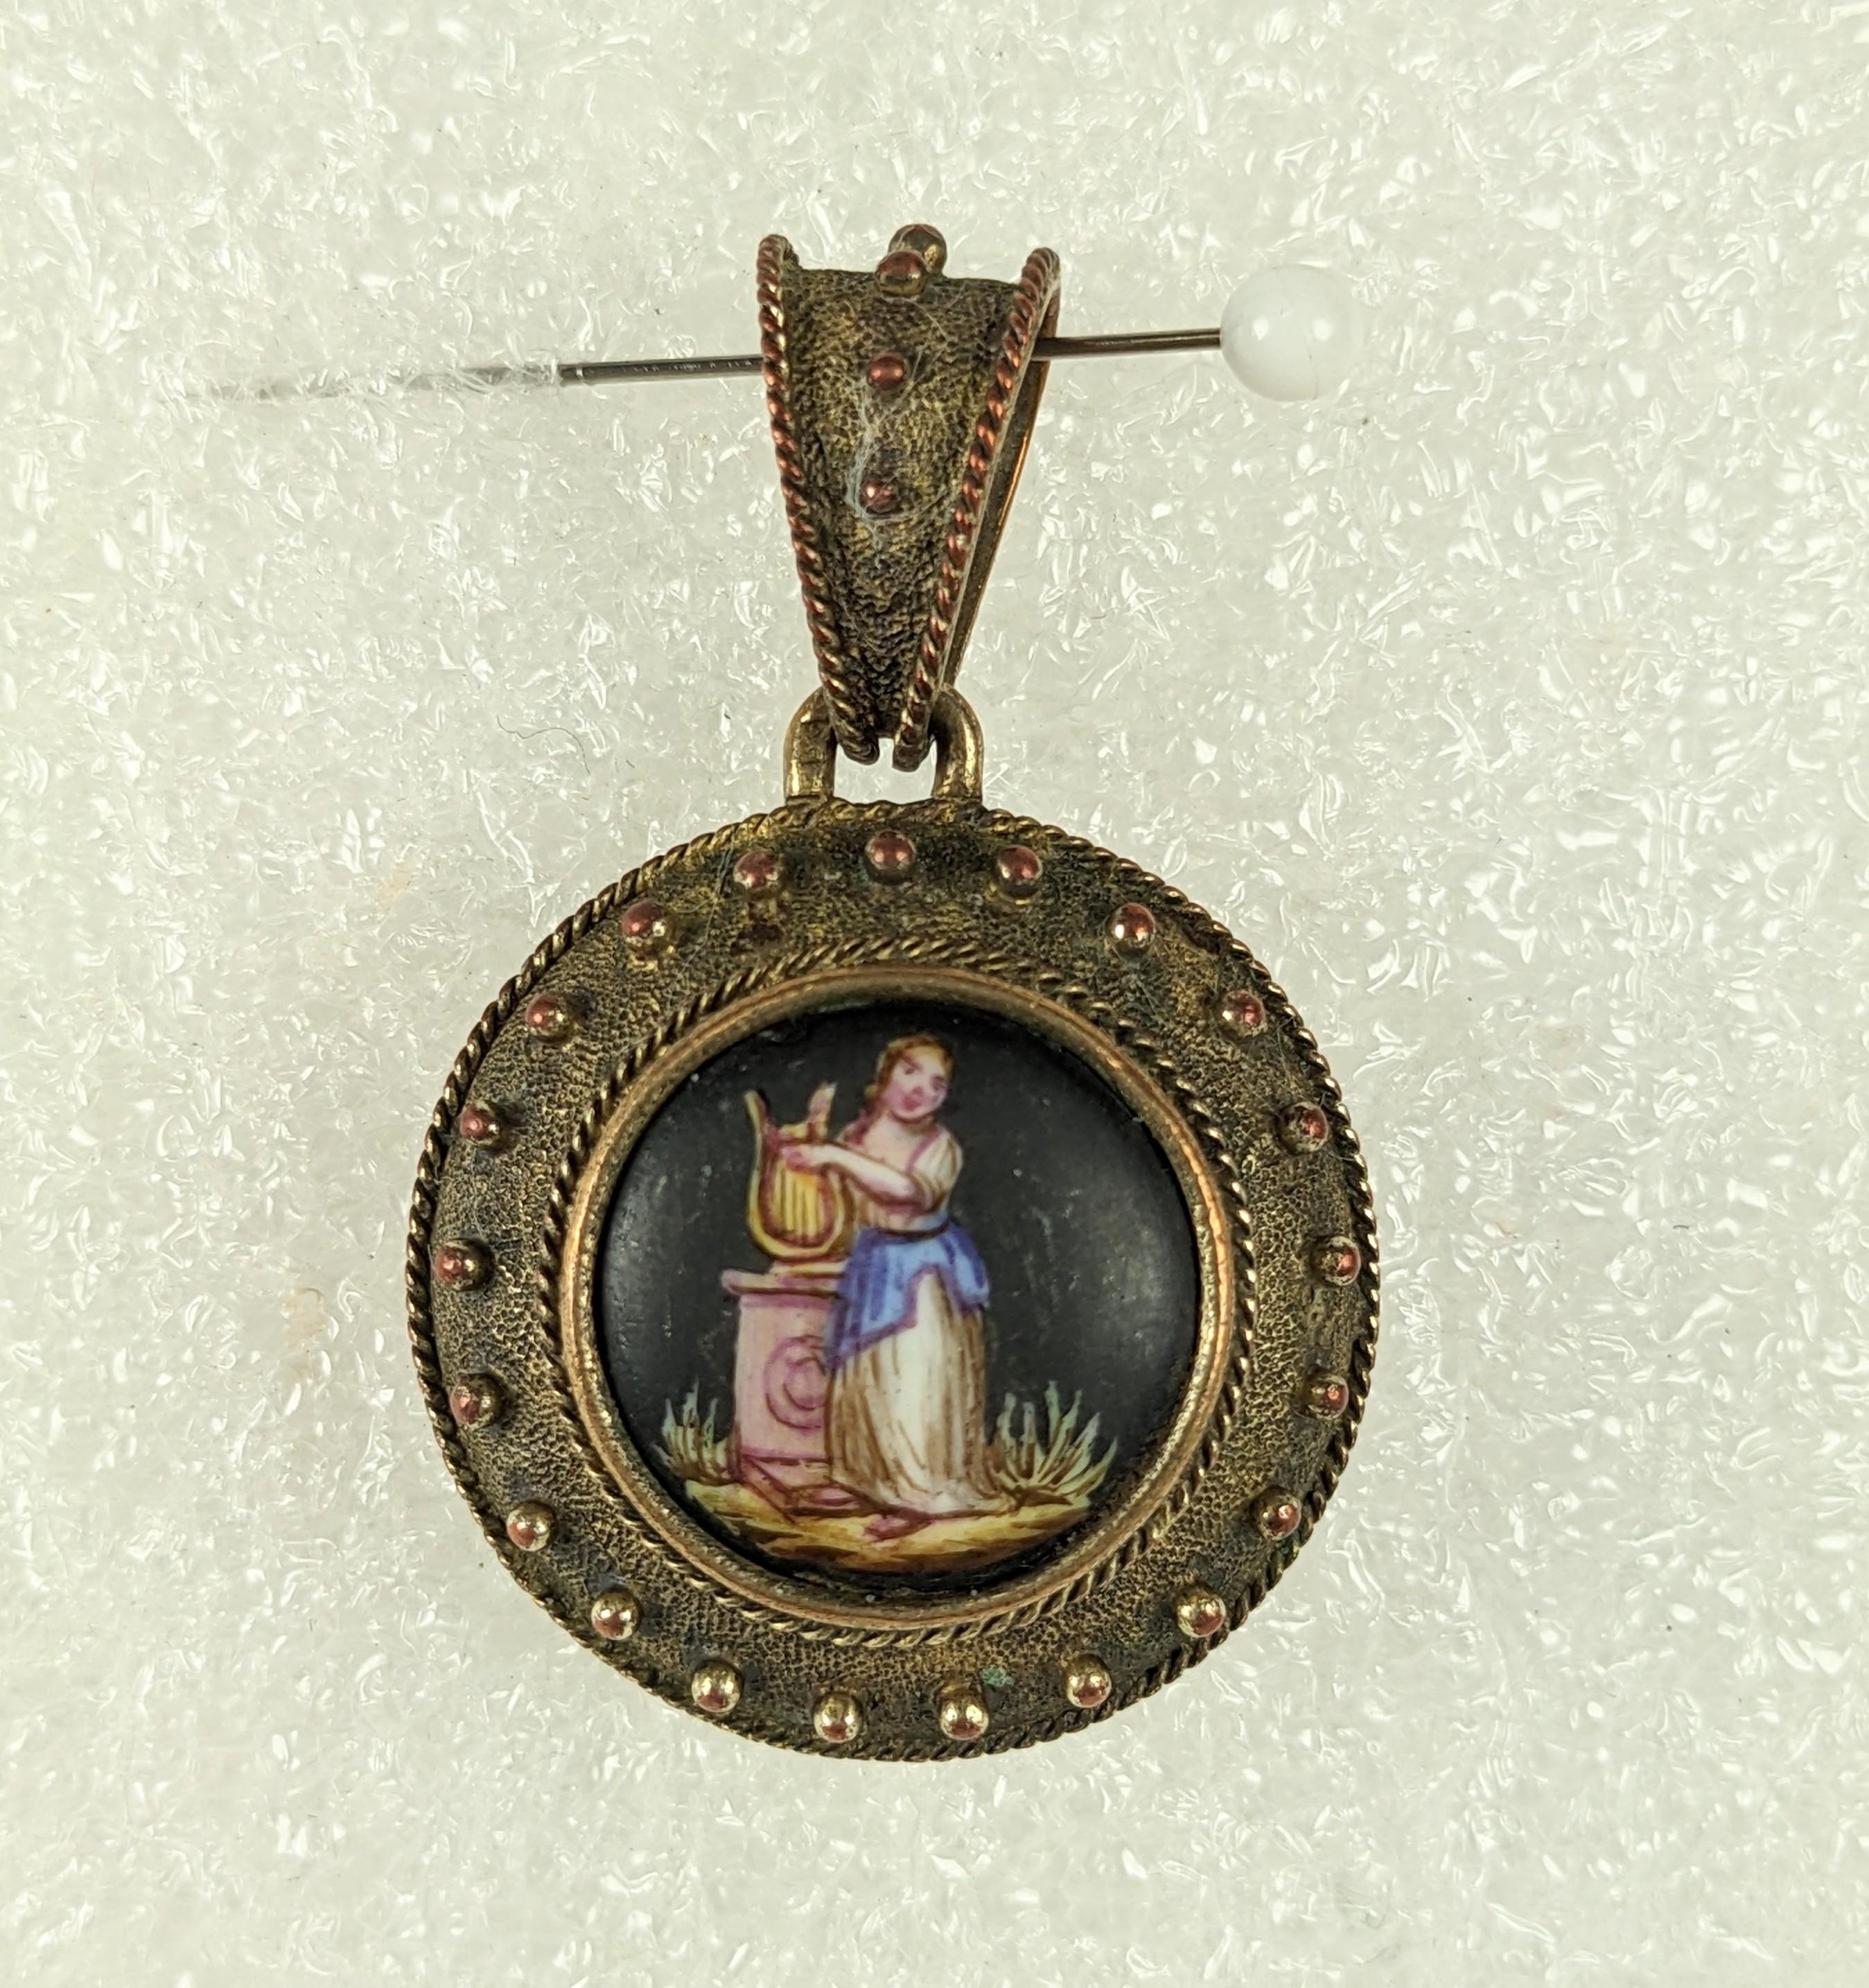 Charming Victorian Painted Etruscan Locket of vermeil silver. Fontenay style painted porcelain motif with maiden holding harp on pedestal. Locket opens in back for storage. 1870's USA. 1.5